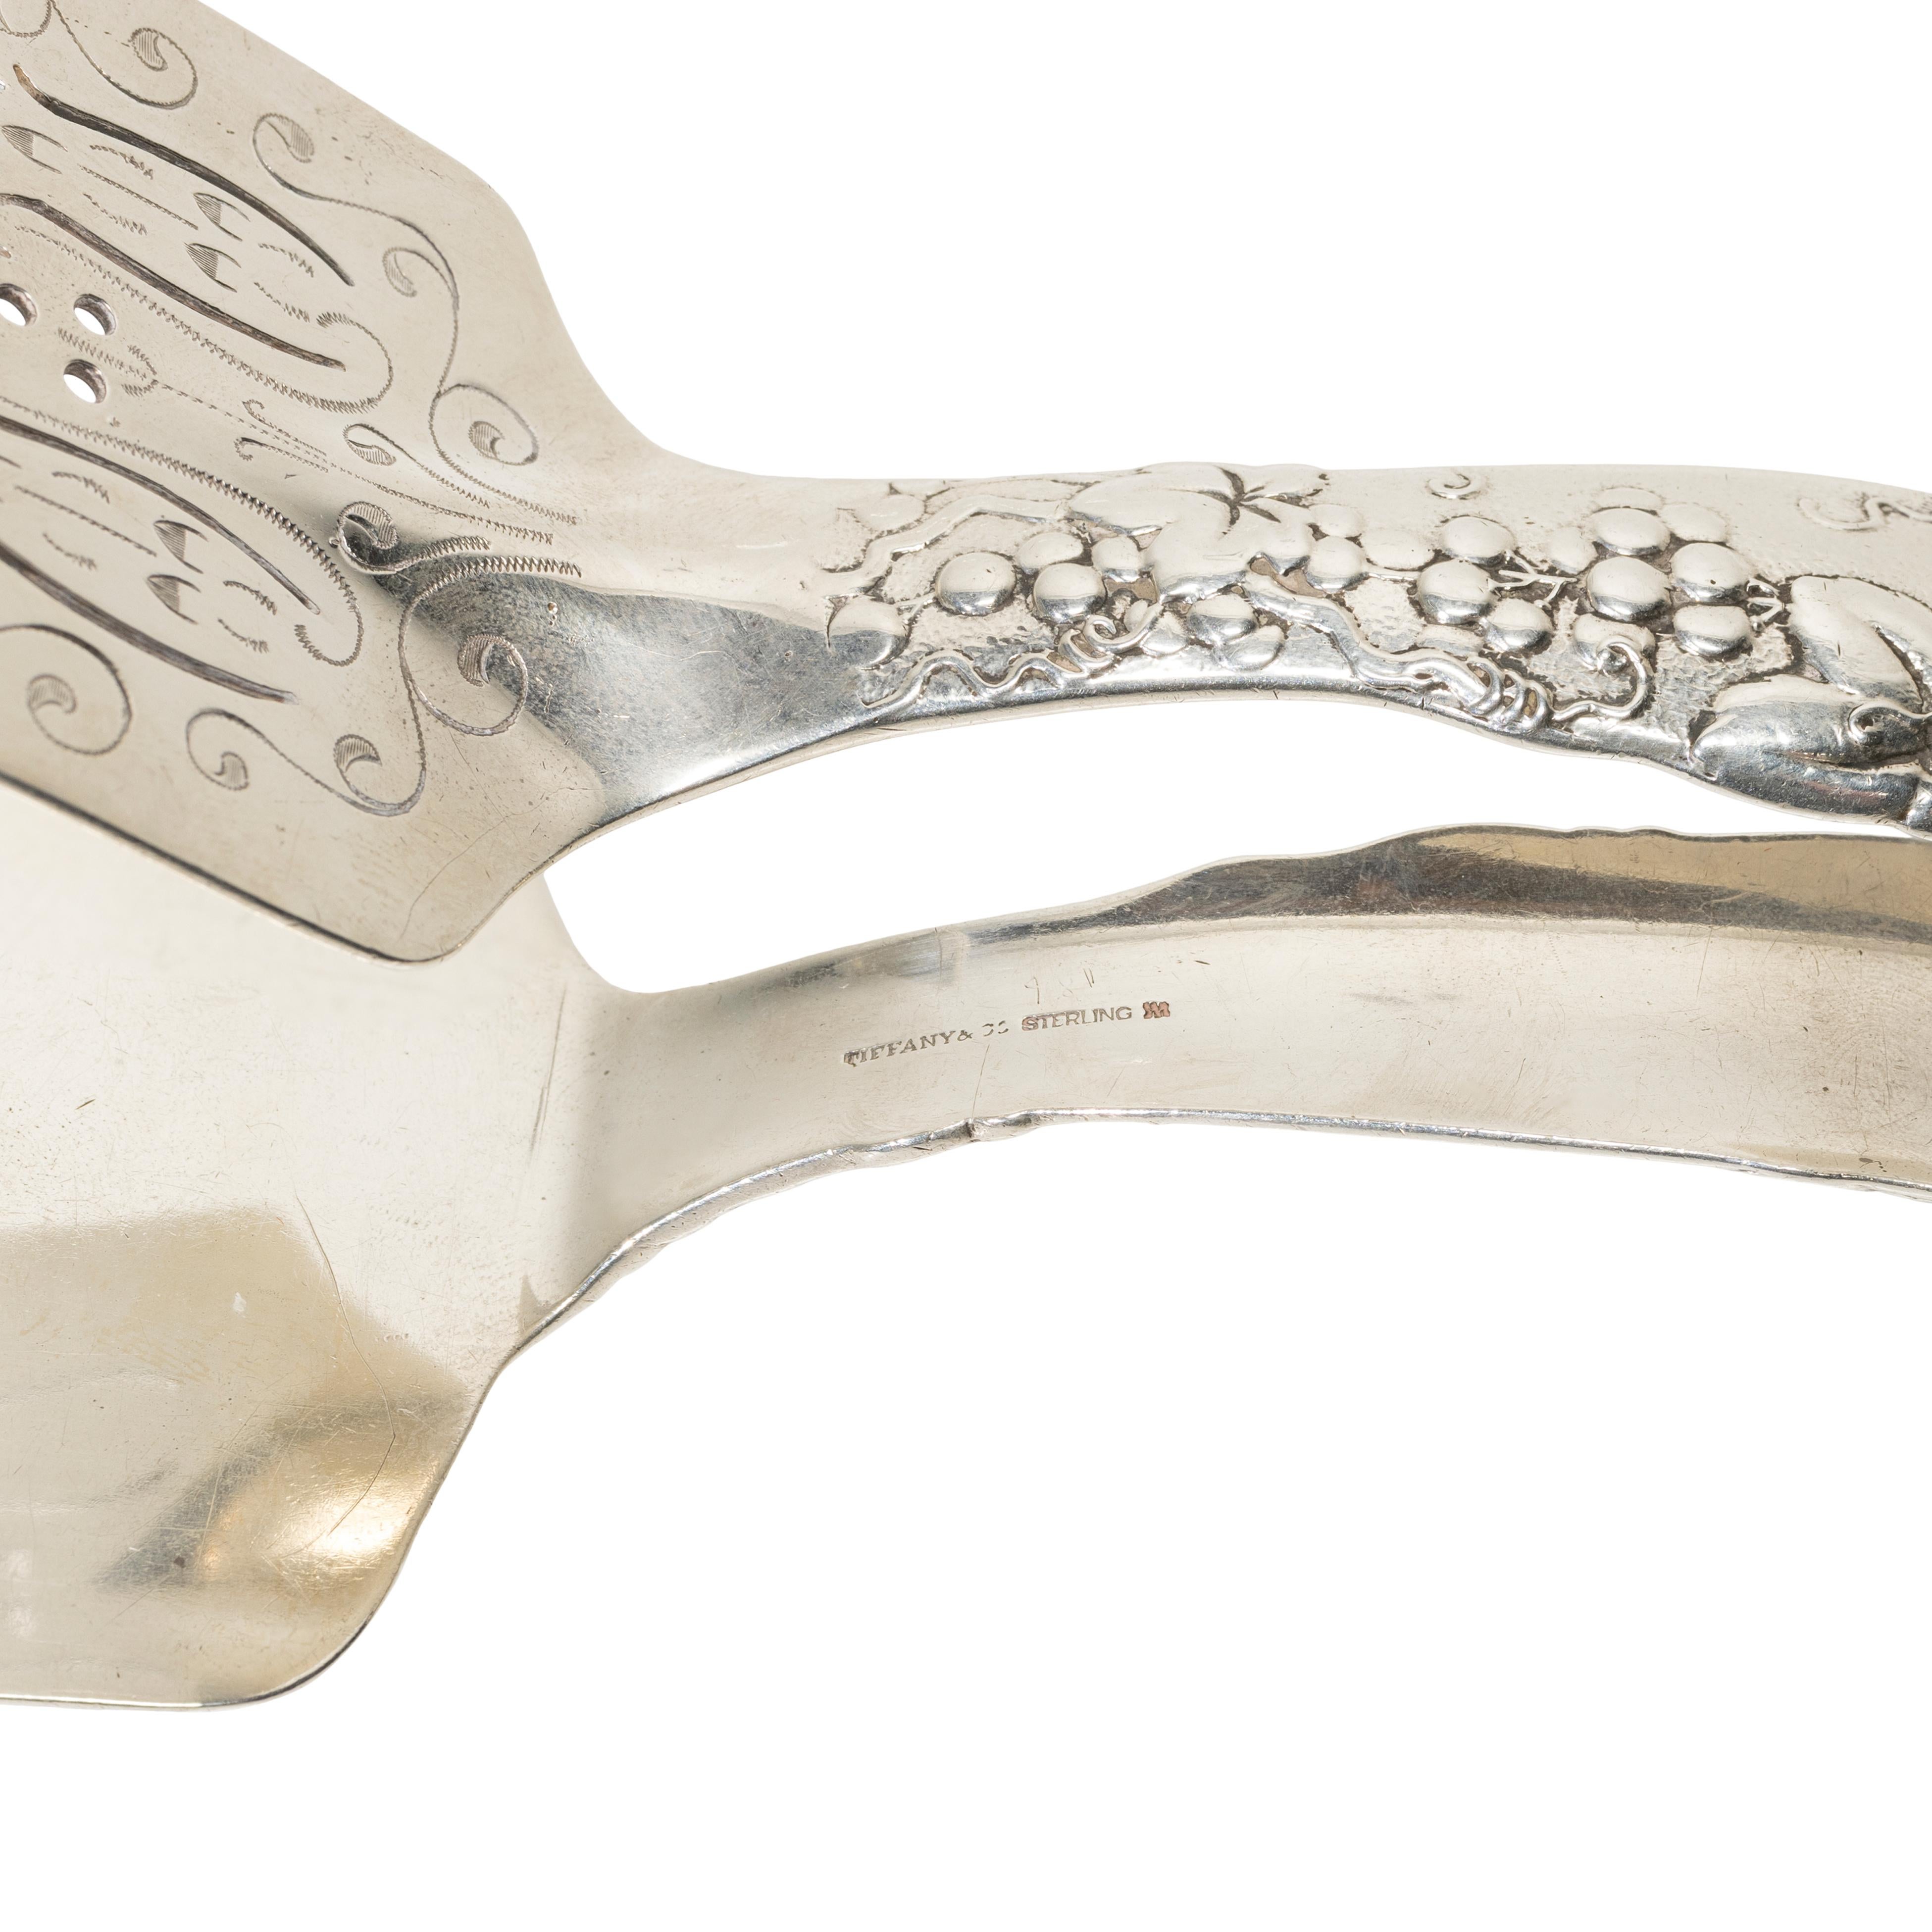 Tiffany & Co. grapevine pattern sterling silver asparagus tongs. New York, c. 1907-1947. Reticulated in etched upper tong, monogrammed. 8